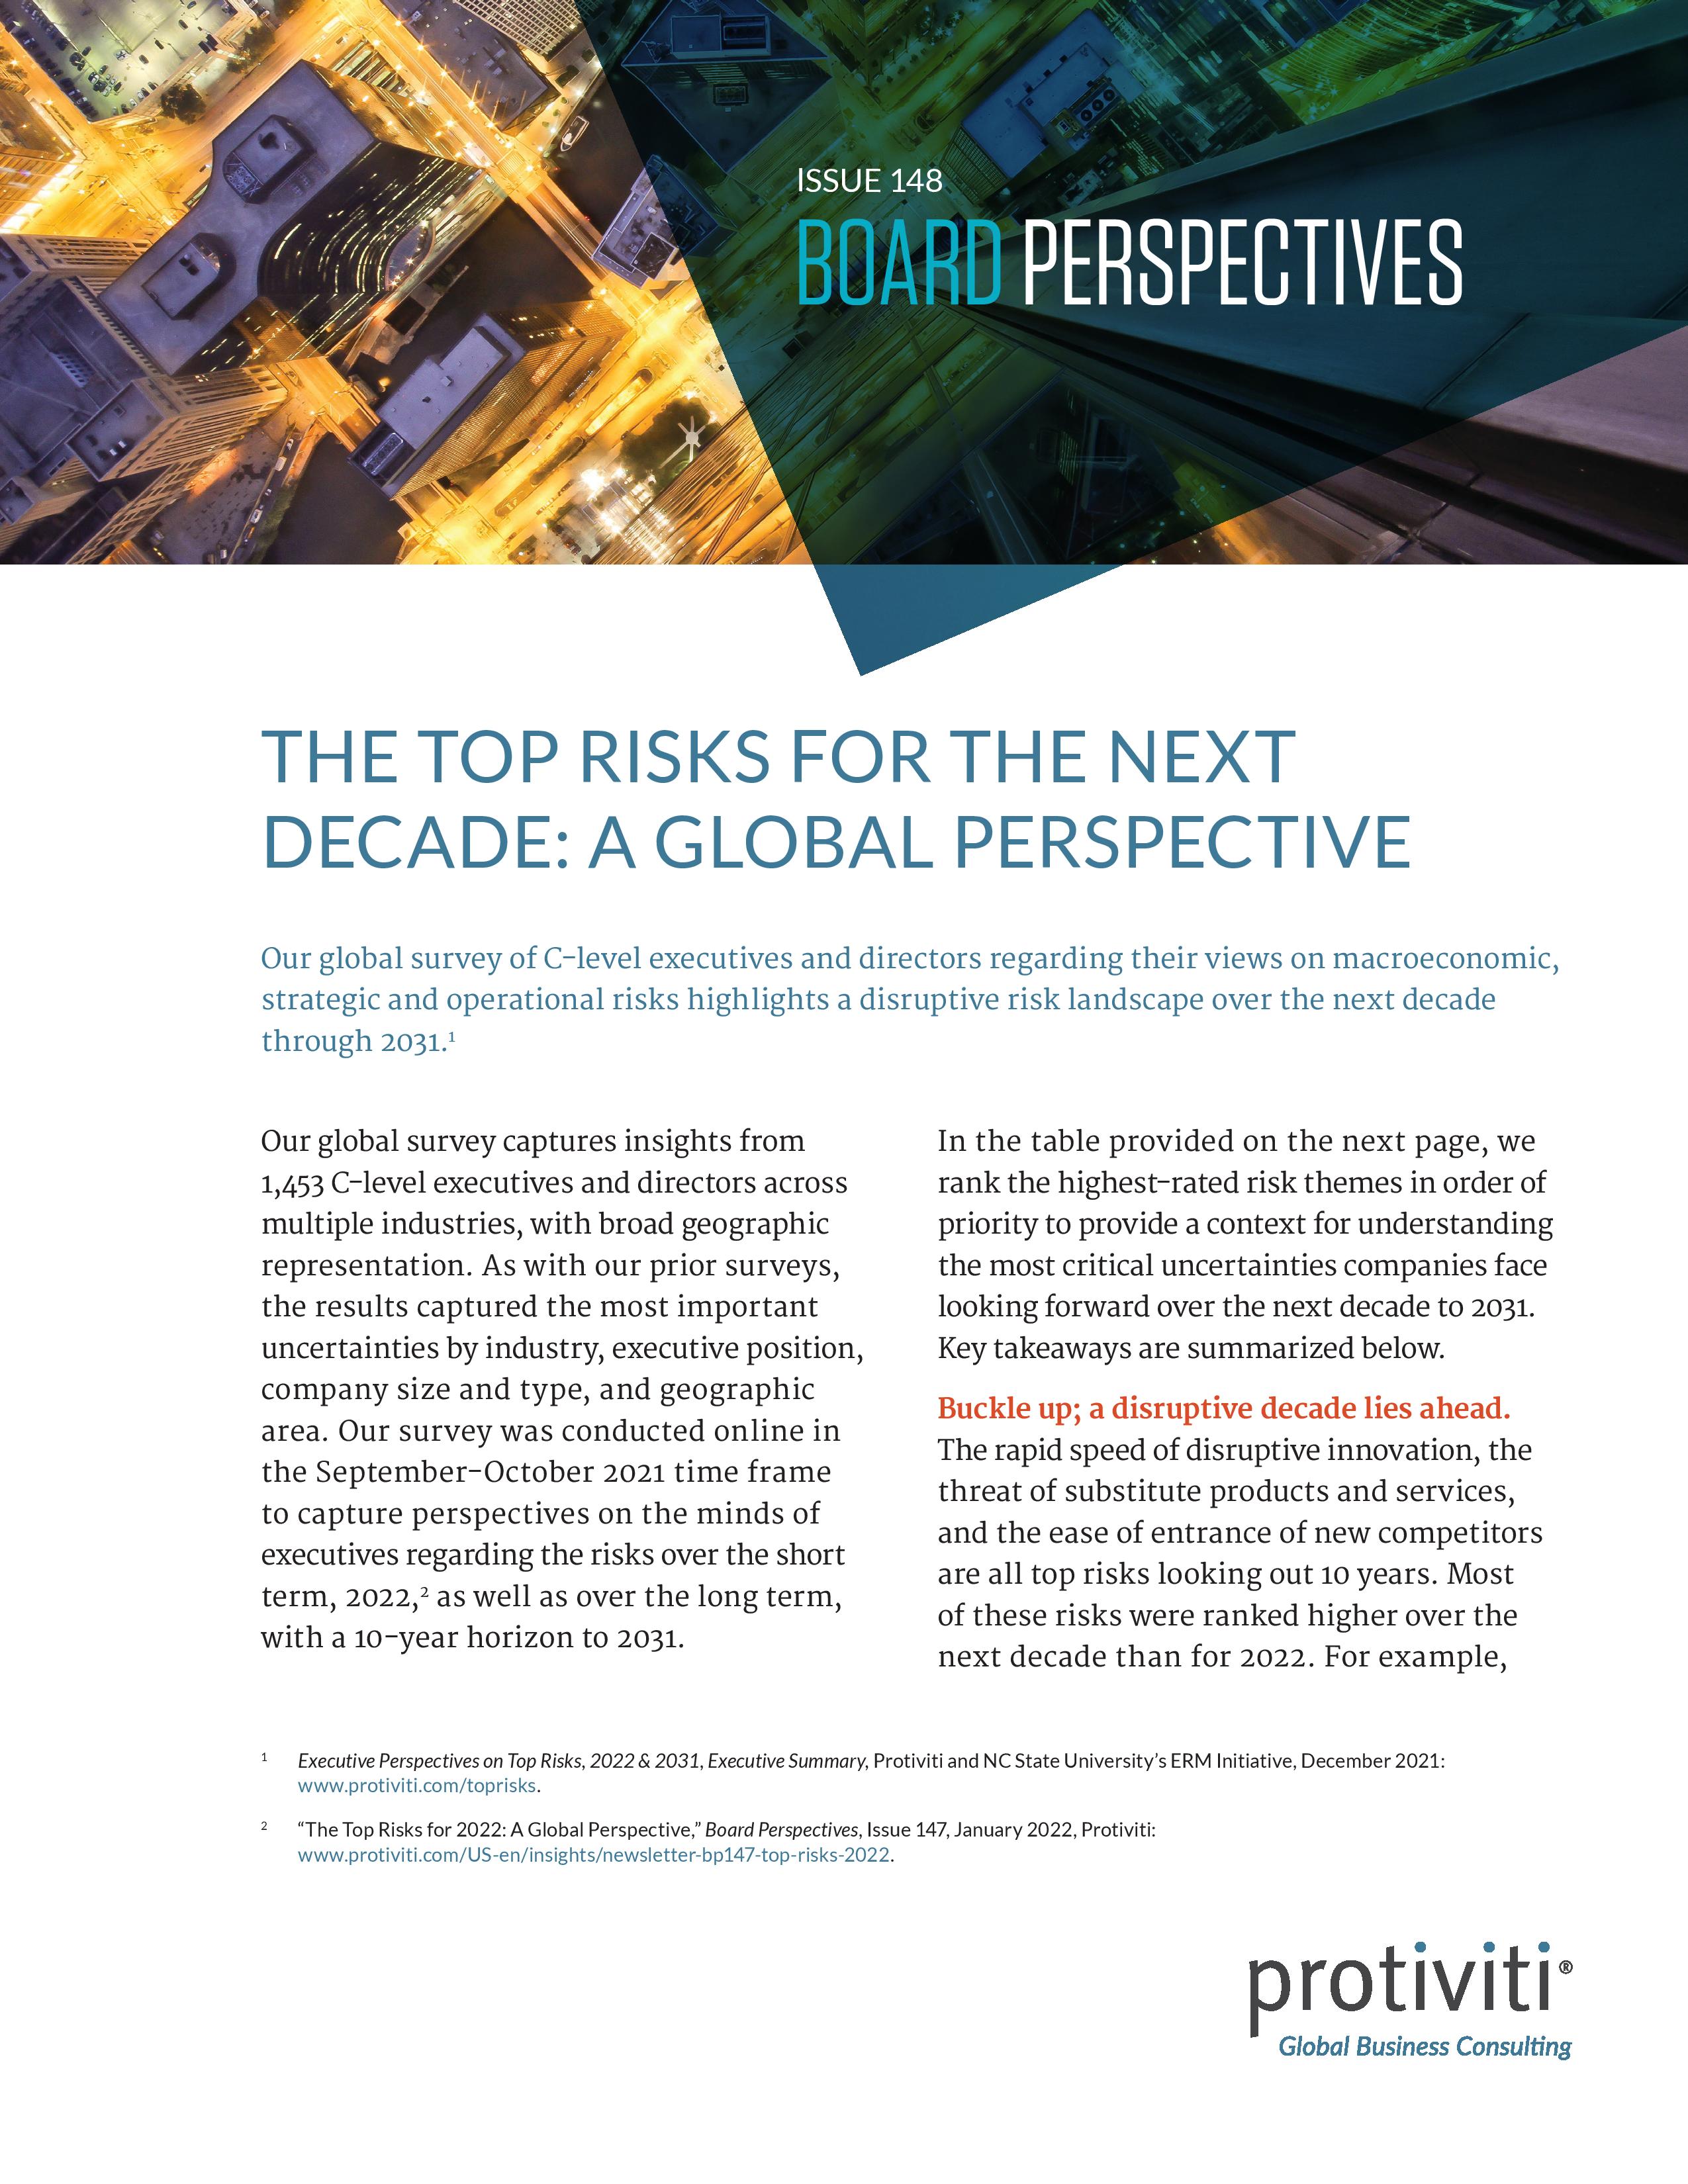 screenshot of the first page of newsletter-bp-issue148-top-risks-next-decade-protiviti-2022 (1)